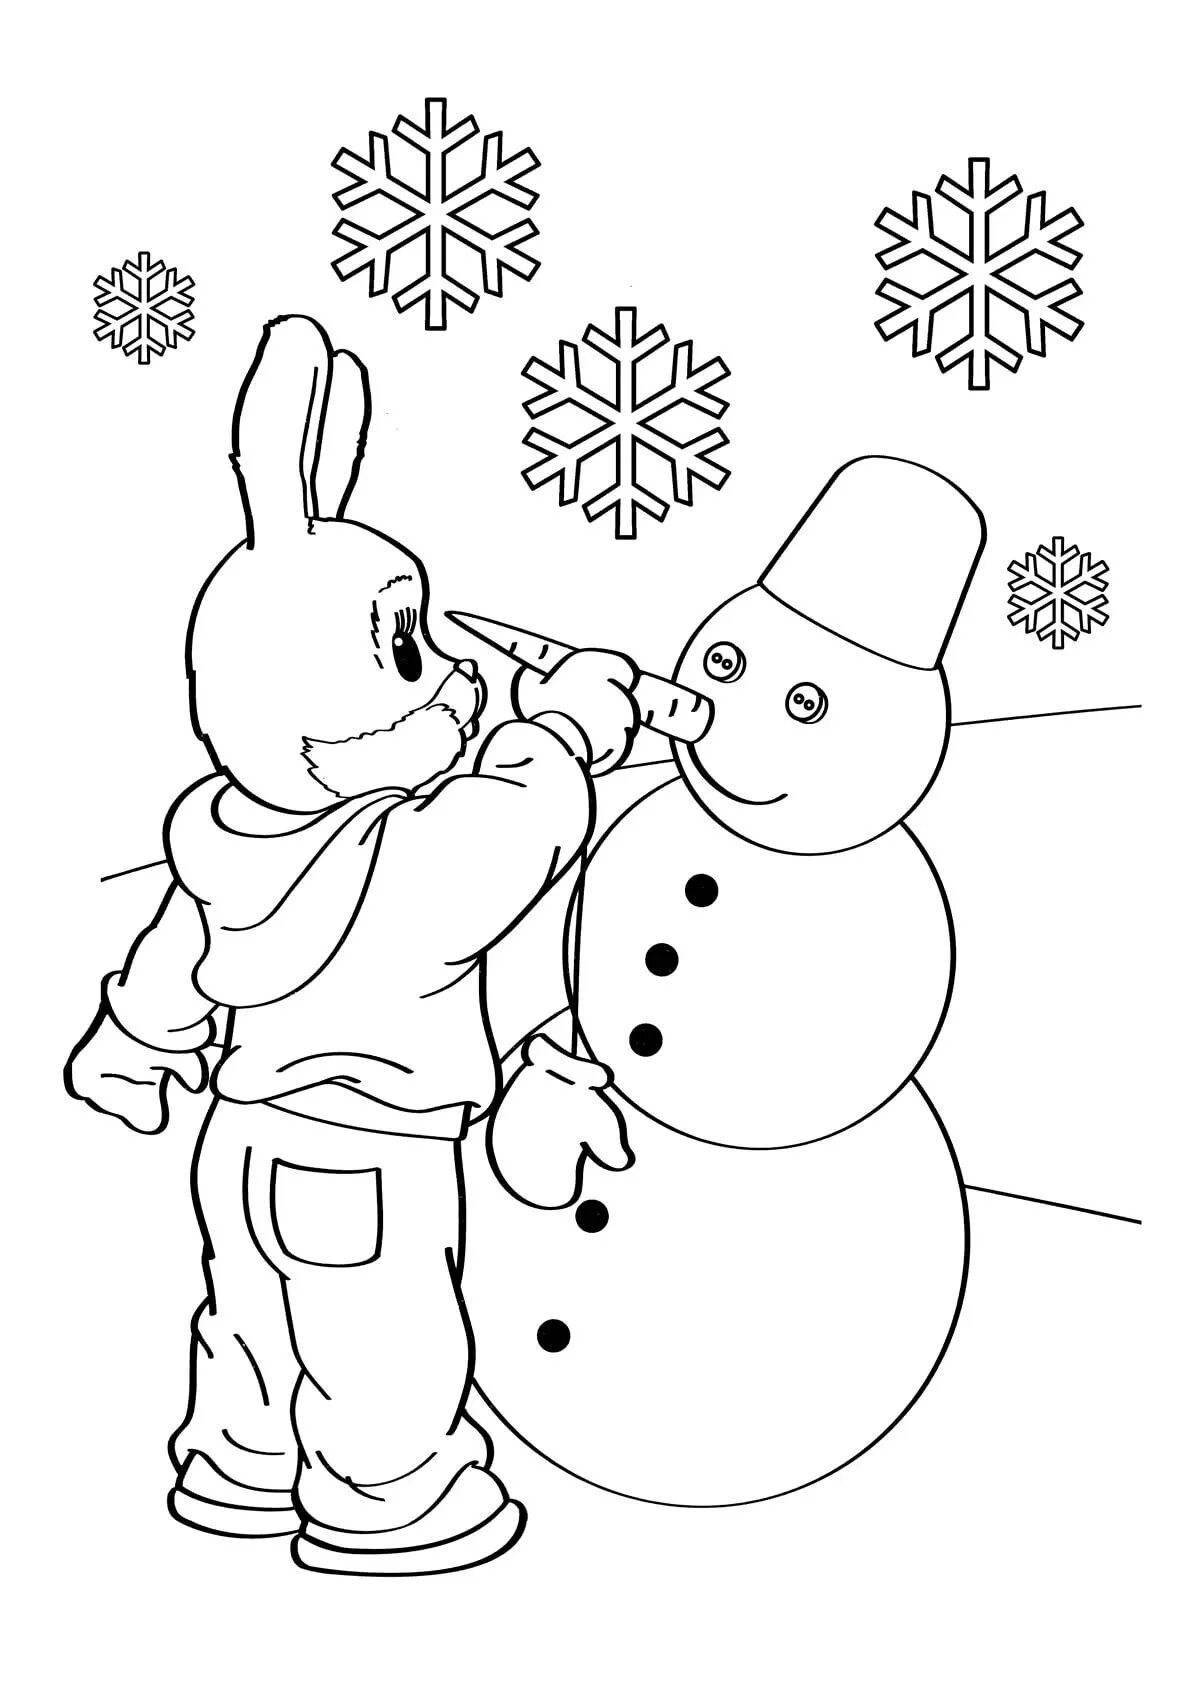 Merry winter coloring book for 3 year olds